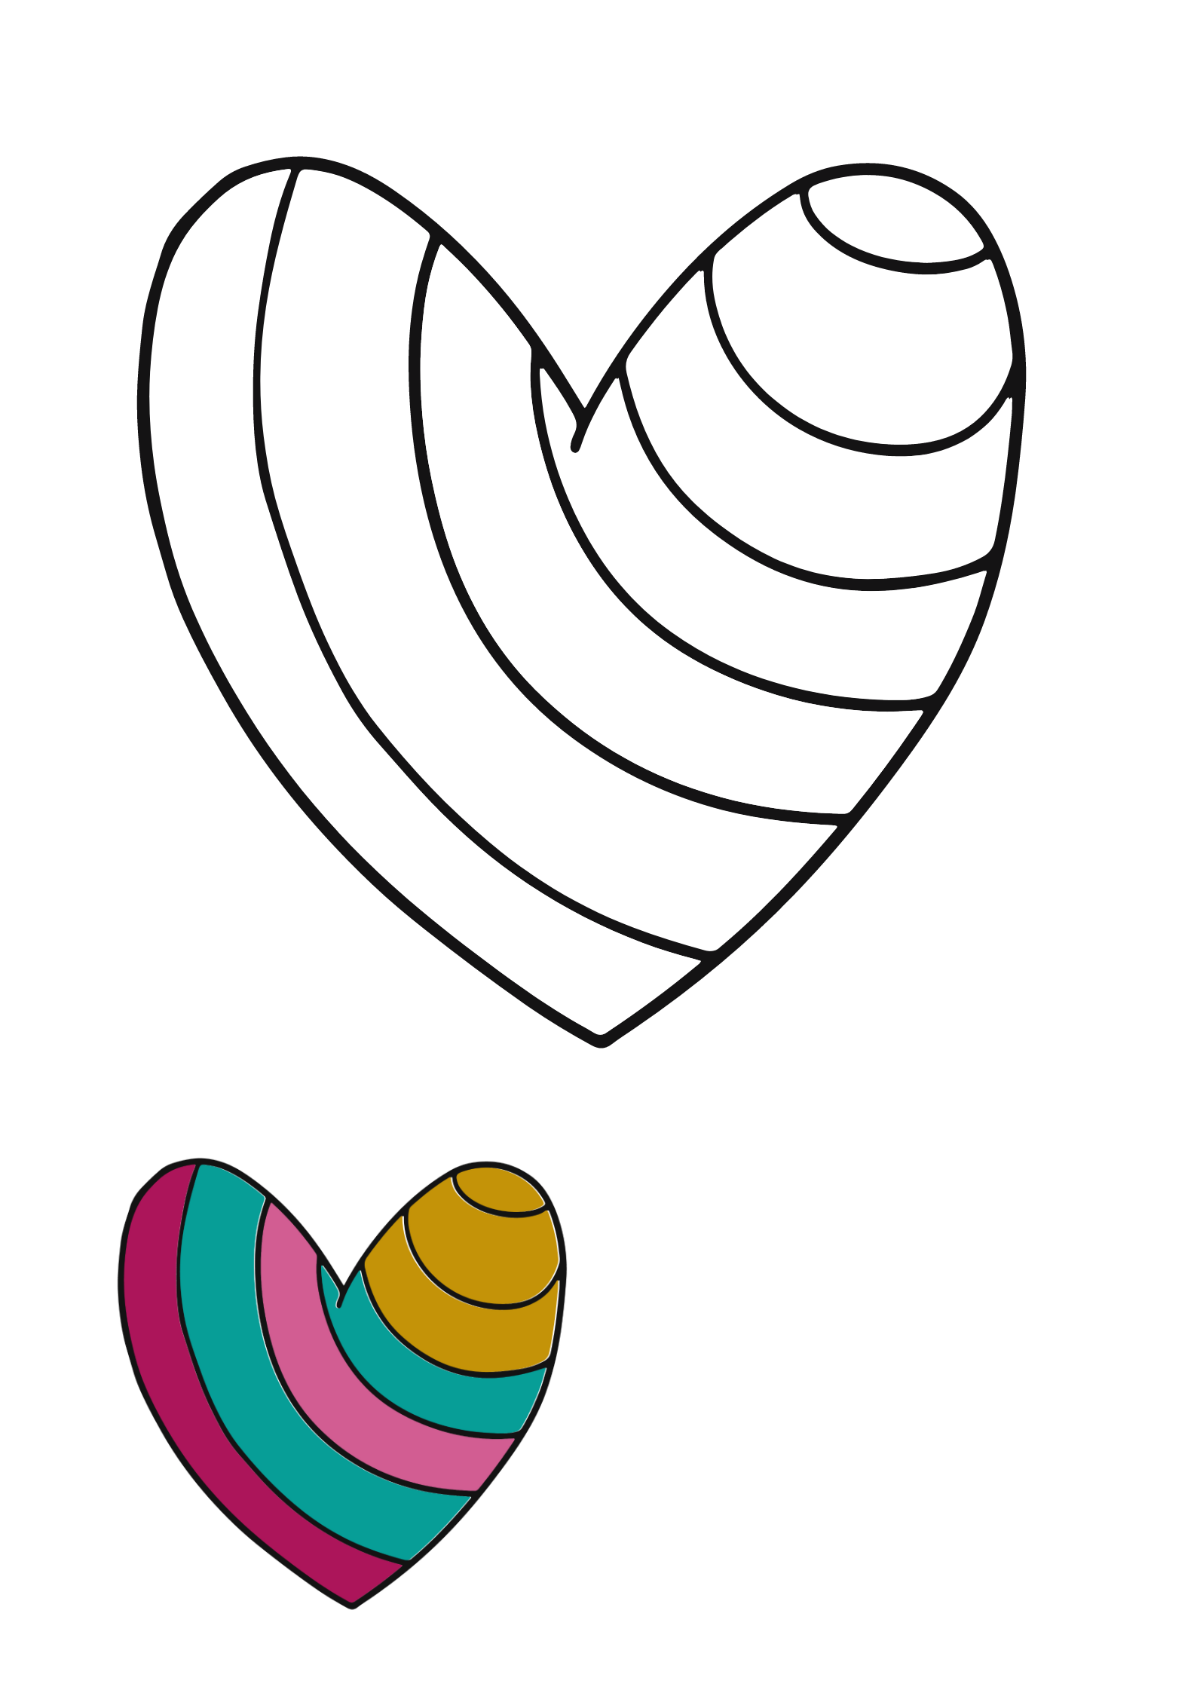 Heart Doodle Coloring Page Template